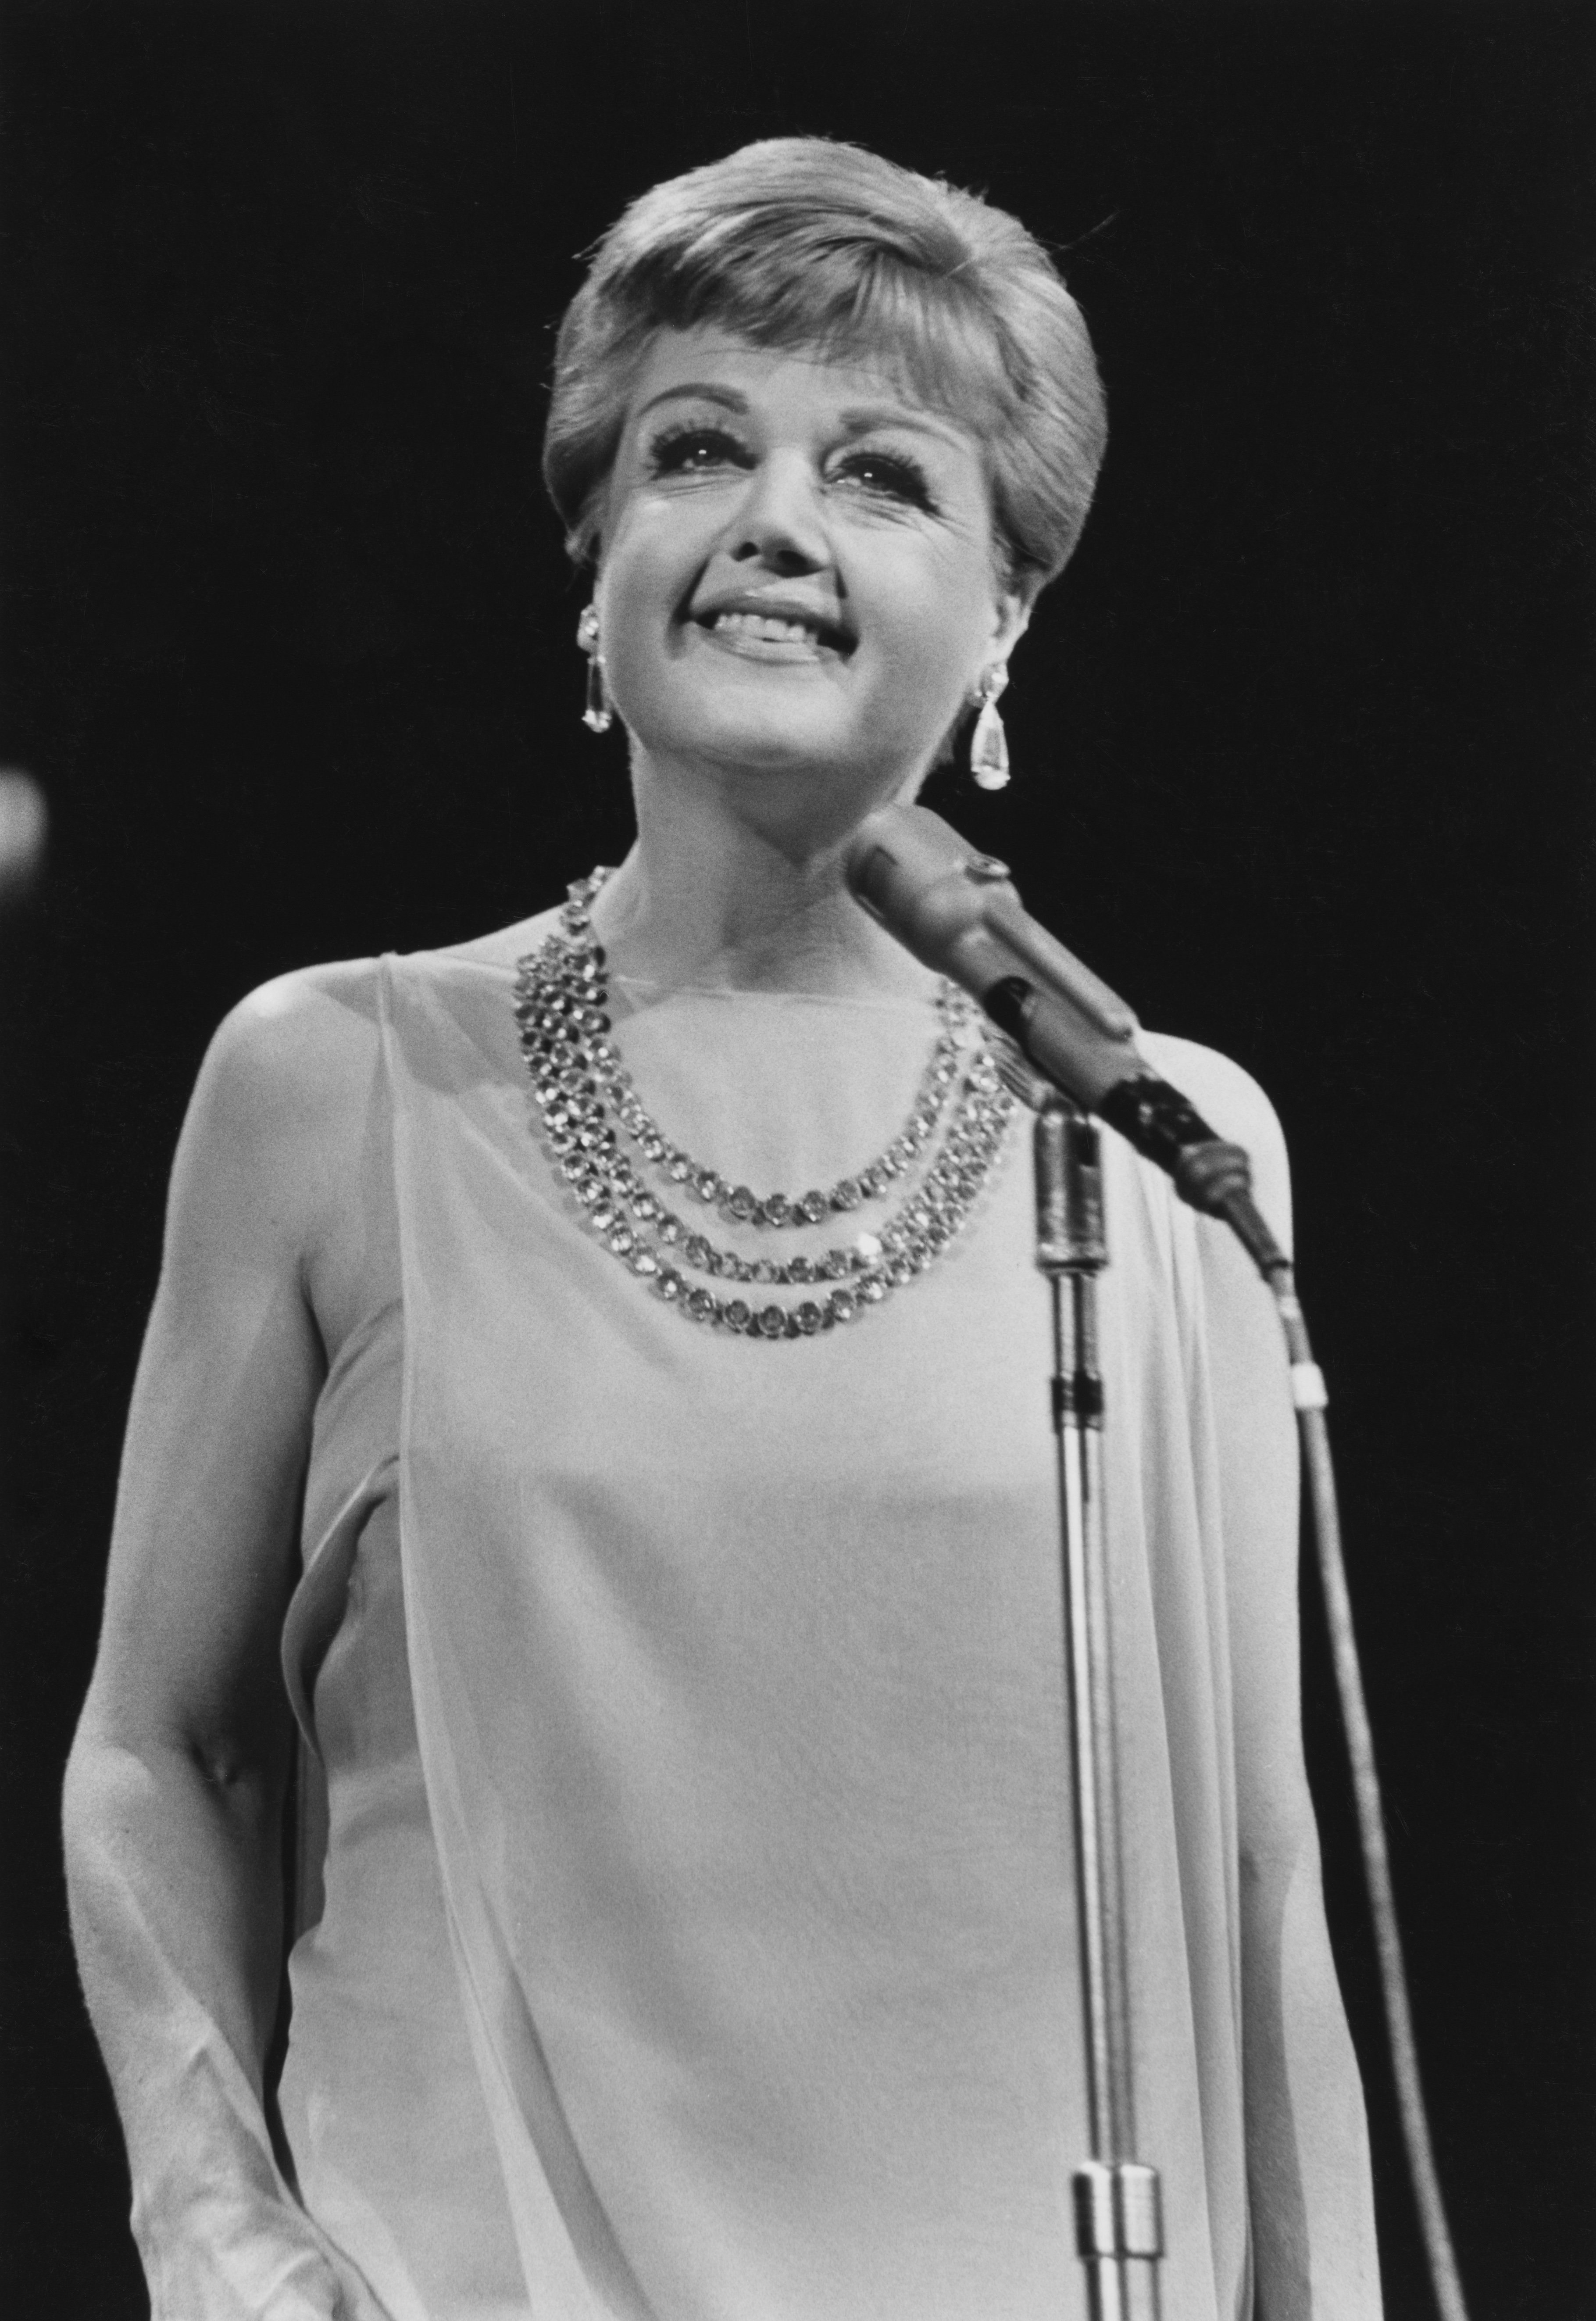 Irish-British actress Angela Lansbury on stage at the 'Stars Salute To Israel' show, staged at Madison Square Garden in New York City, New York, 11th June 1967. | Source: Getty Images